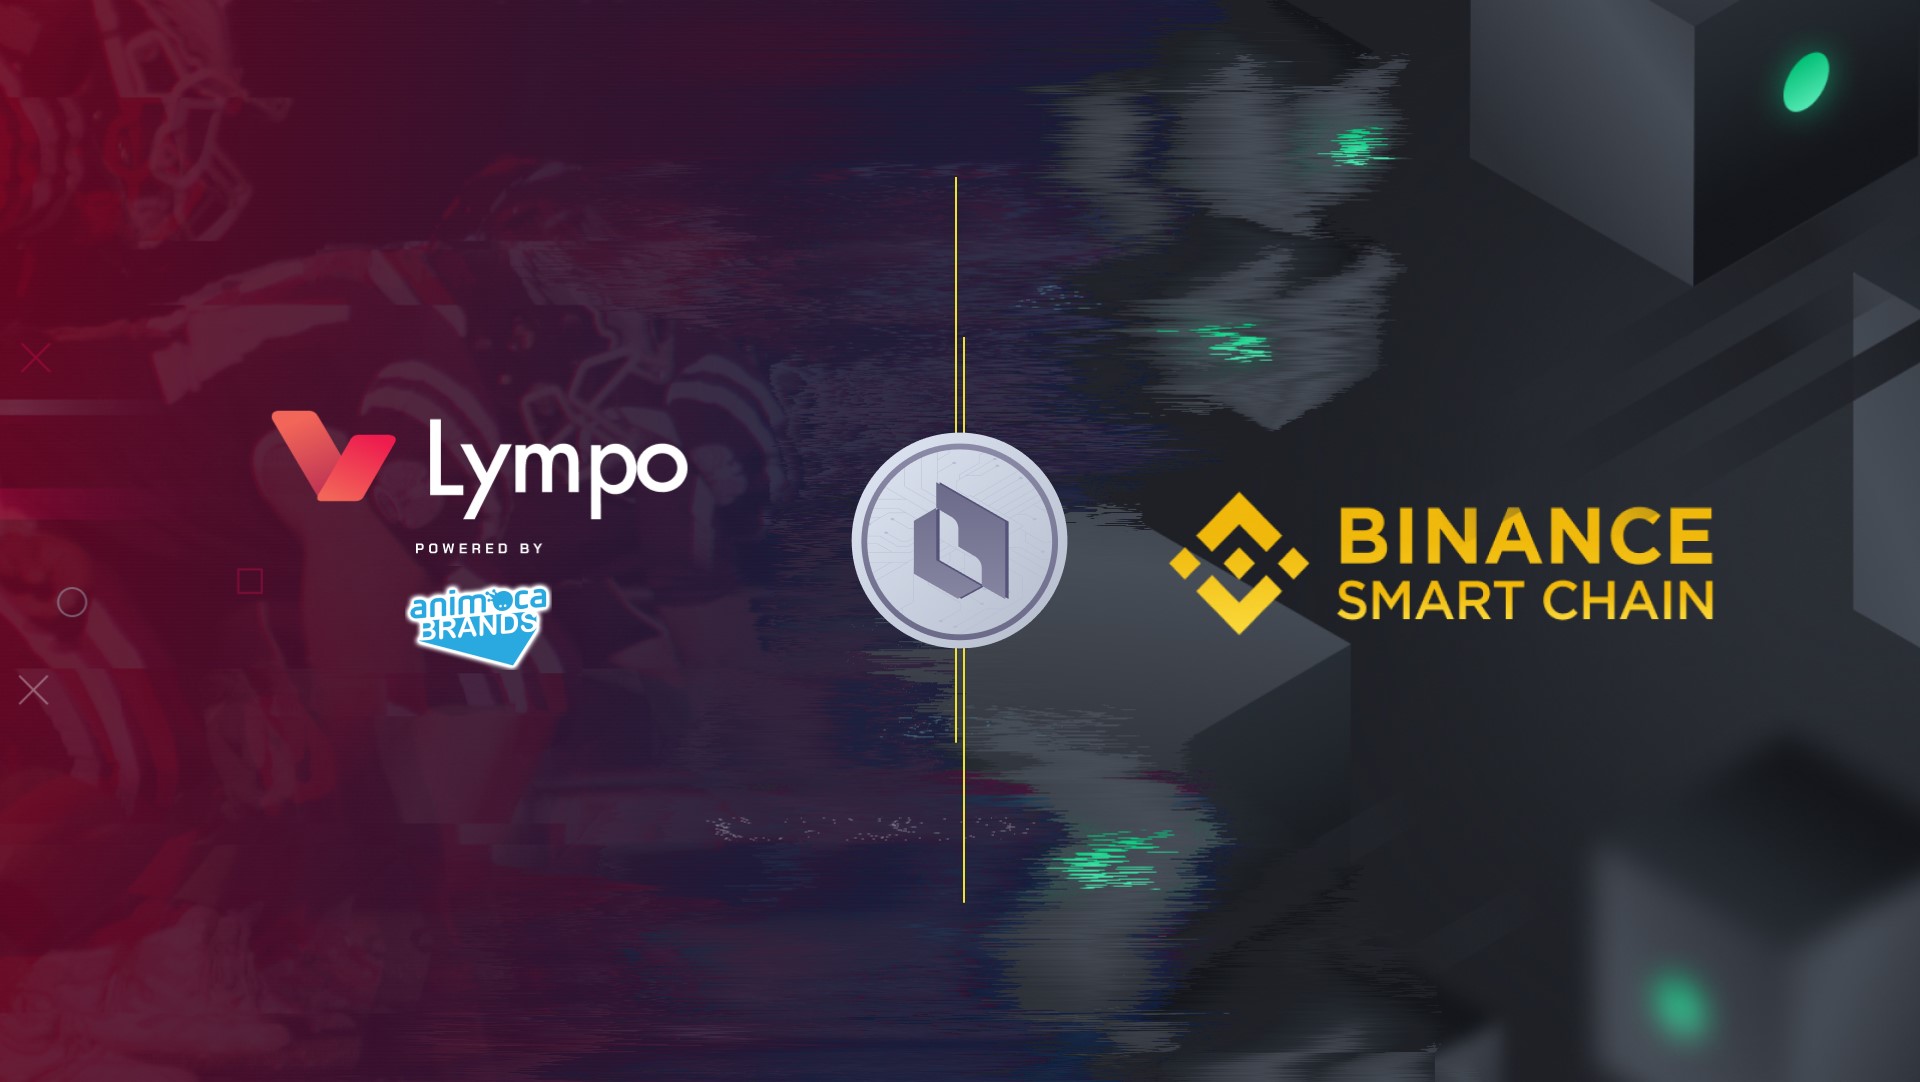 Lympo to launch LMT utility token for sports NFT collectibles on the Binance Smart Chain